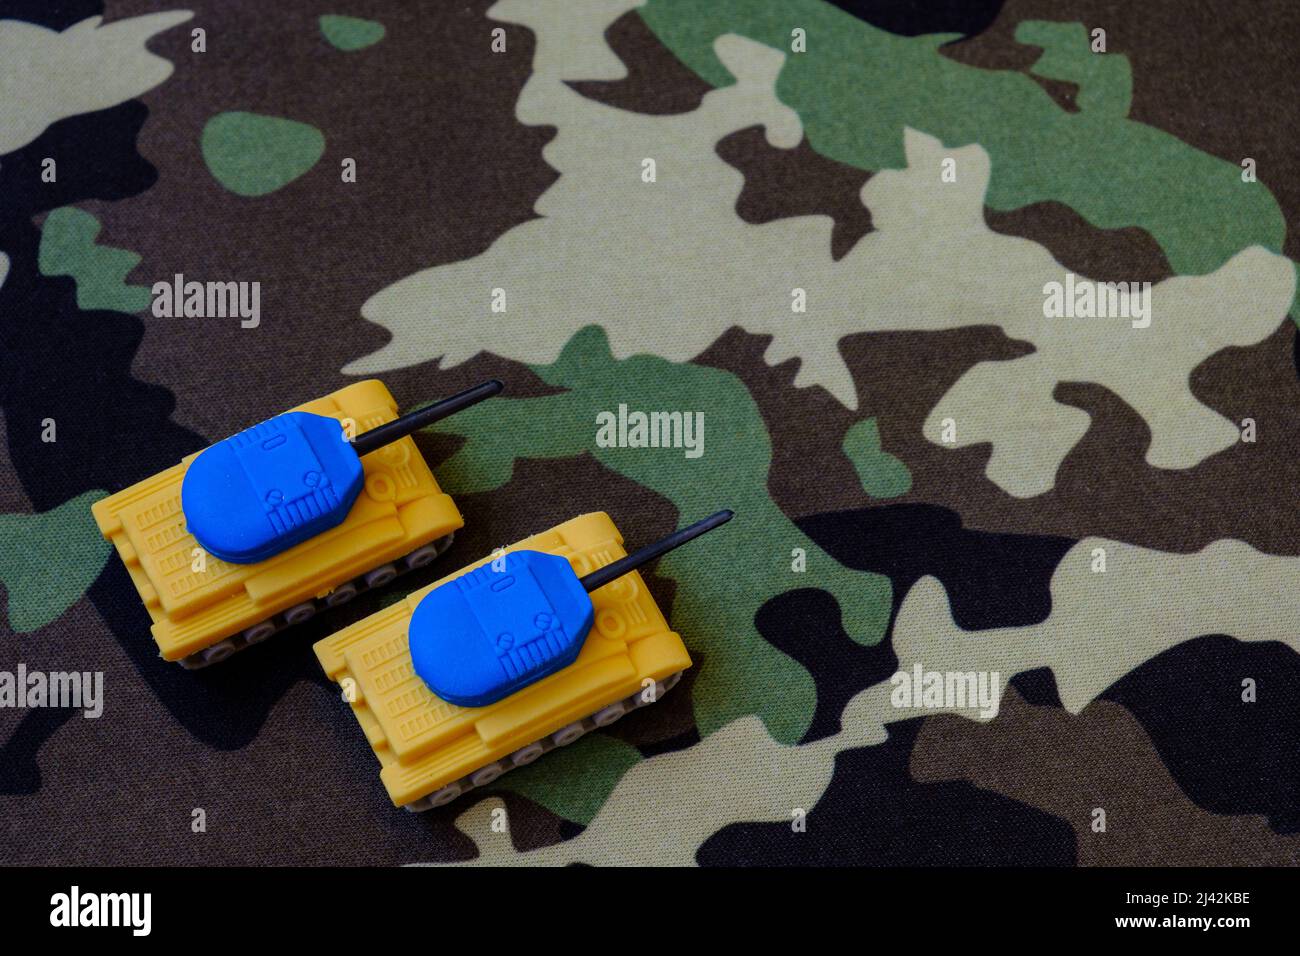 Yellow-blue tanks figures on camouflage background, Ukrainian flag colors on toy tank figures, anti-war concept, selective focus Stock Photo